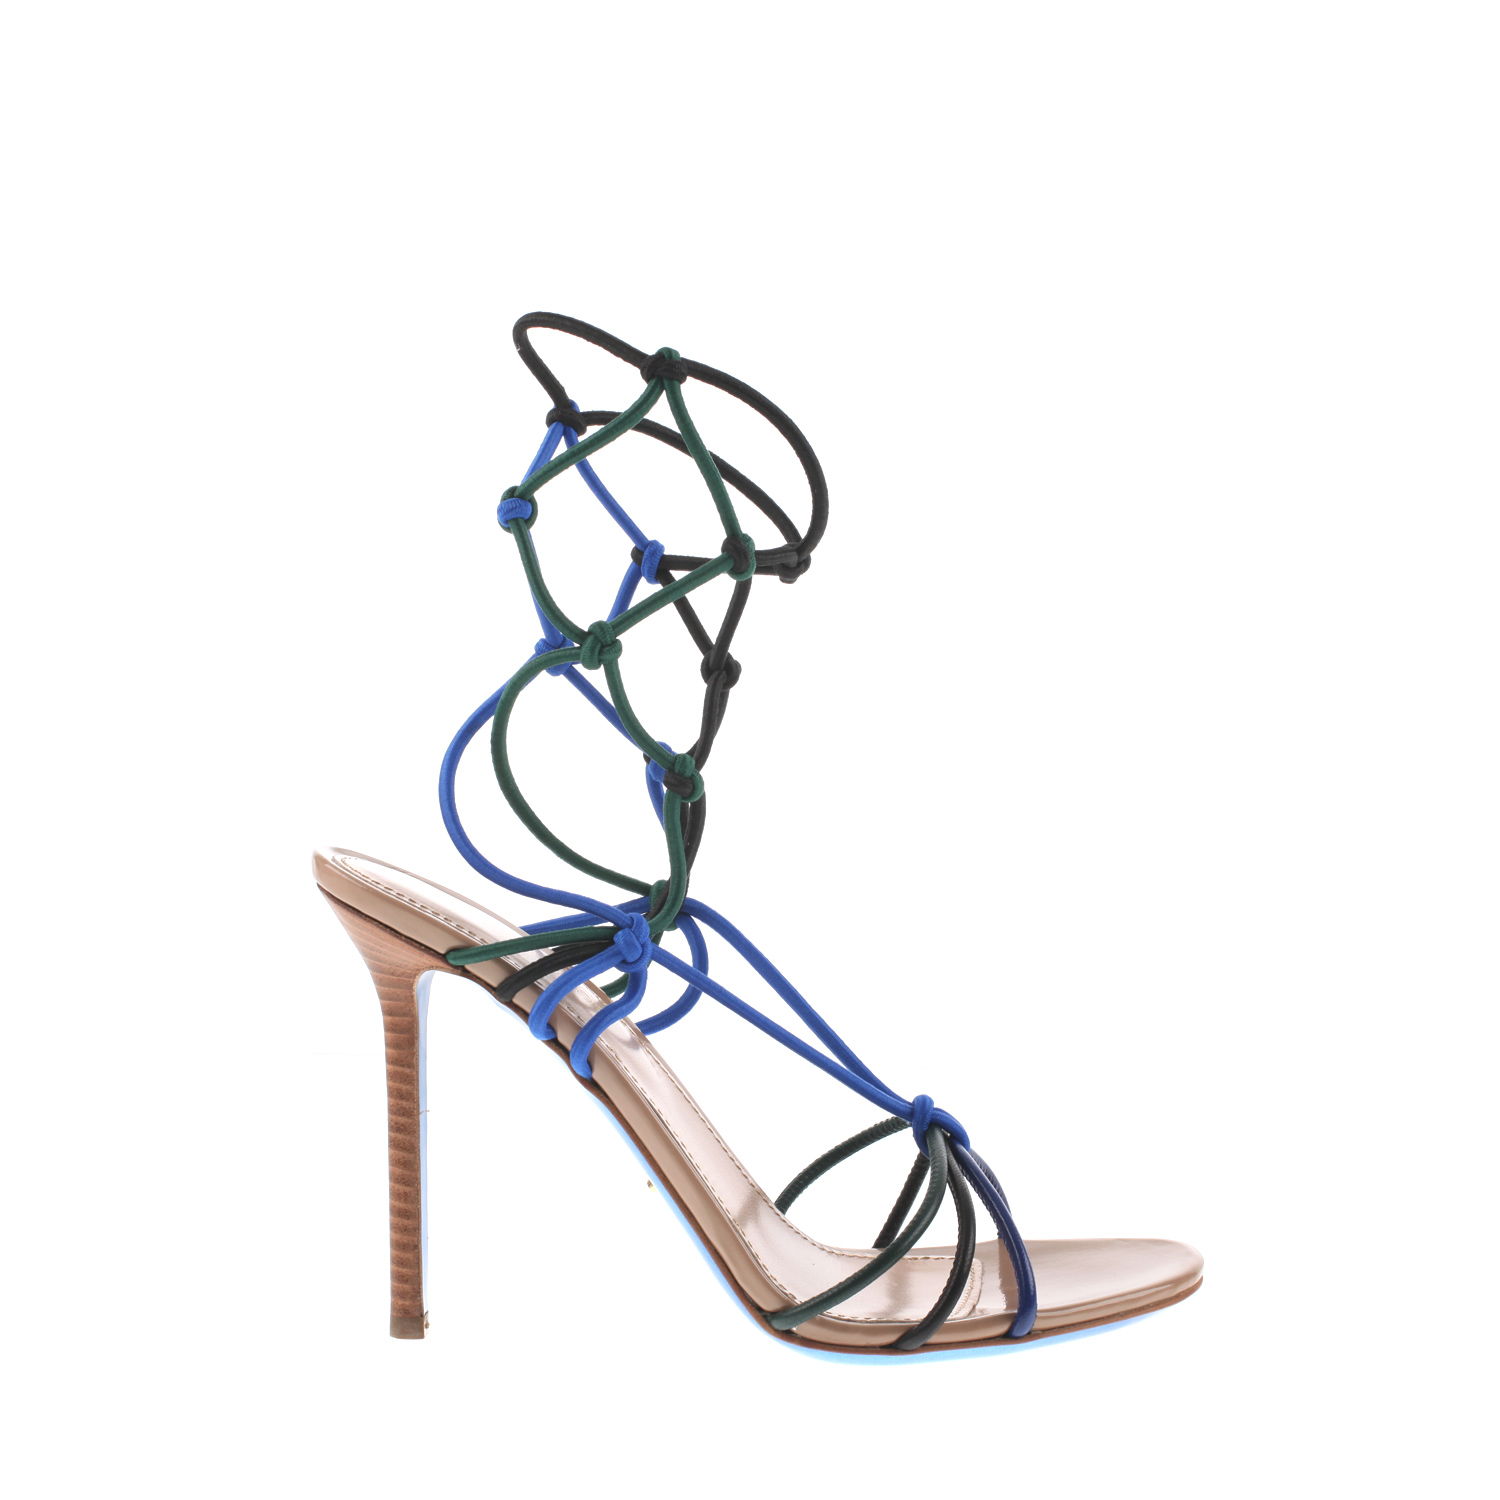 Sergio Rossi Strappy Sandals in Multicolor Leather and Knotted Elastics ...